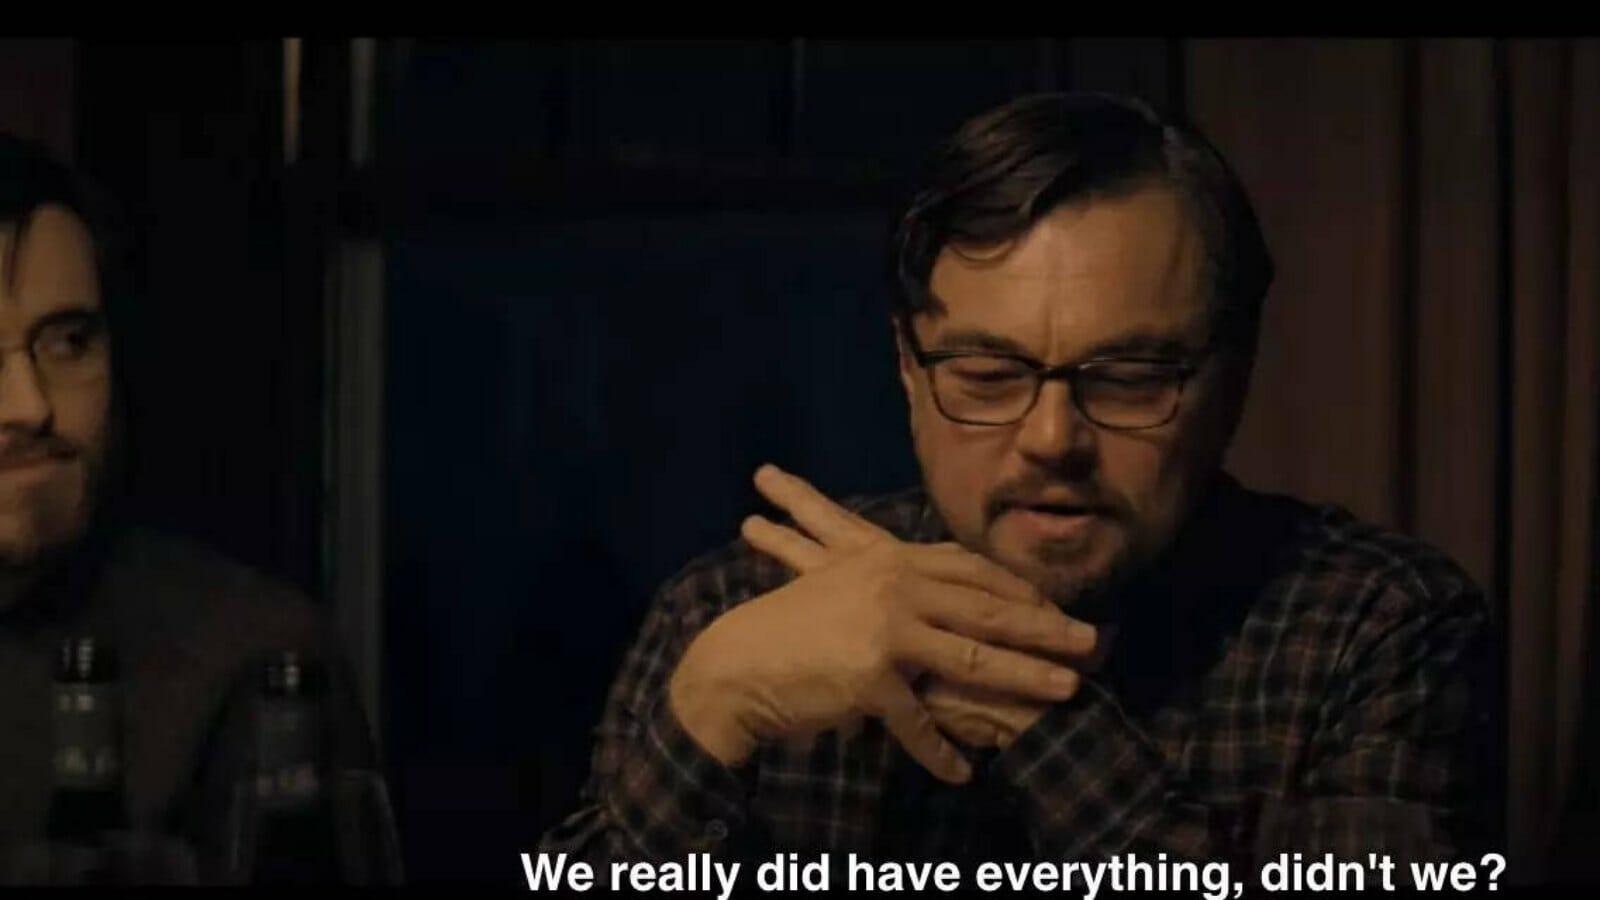 Leonardo DiCaprio improvised this dialogue in 'Don't Look Up'